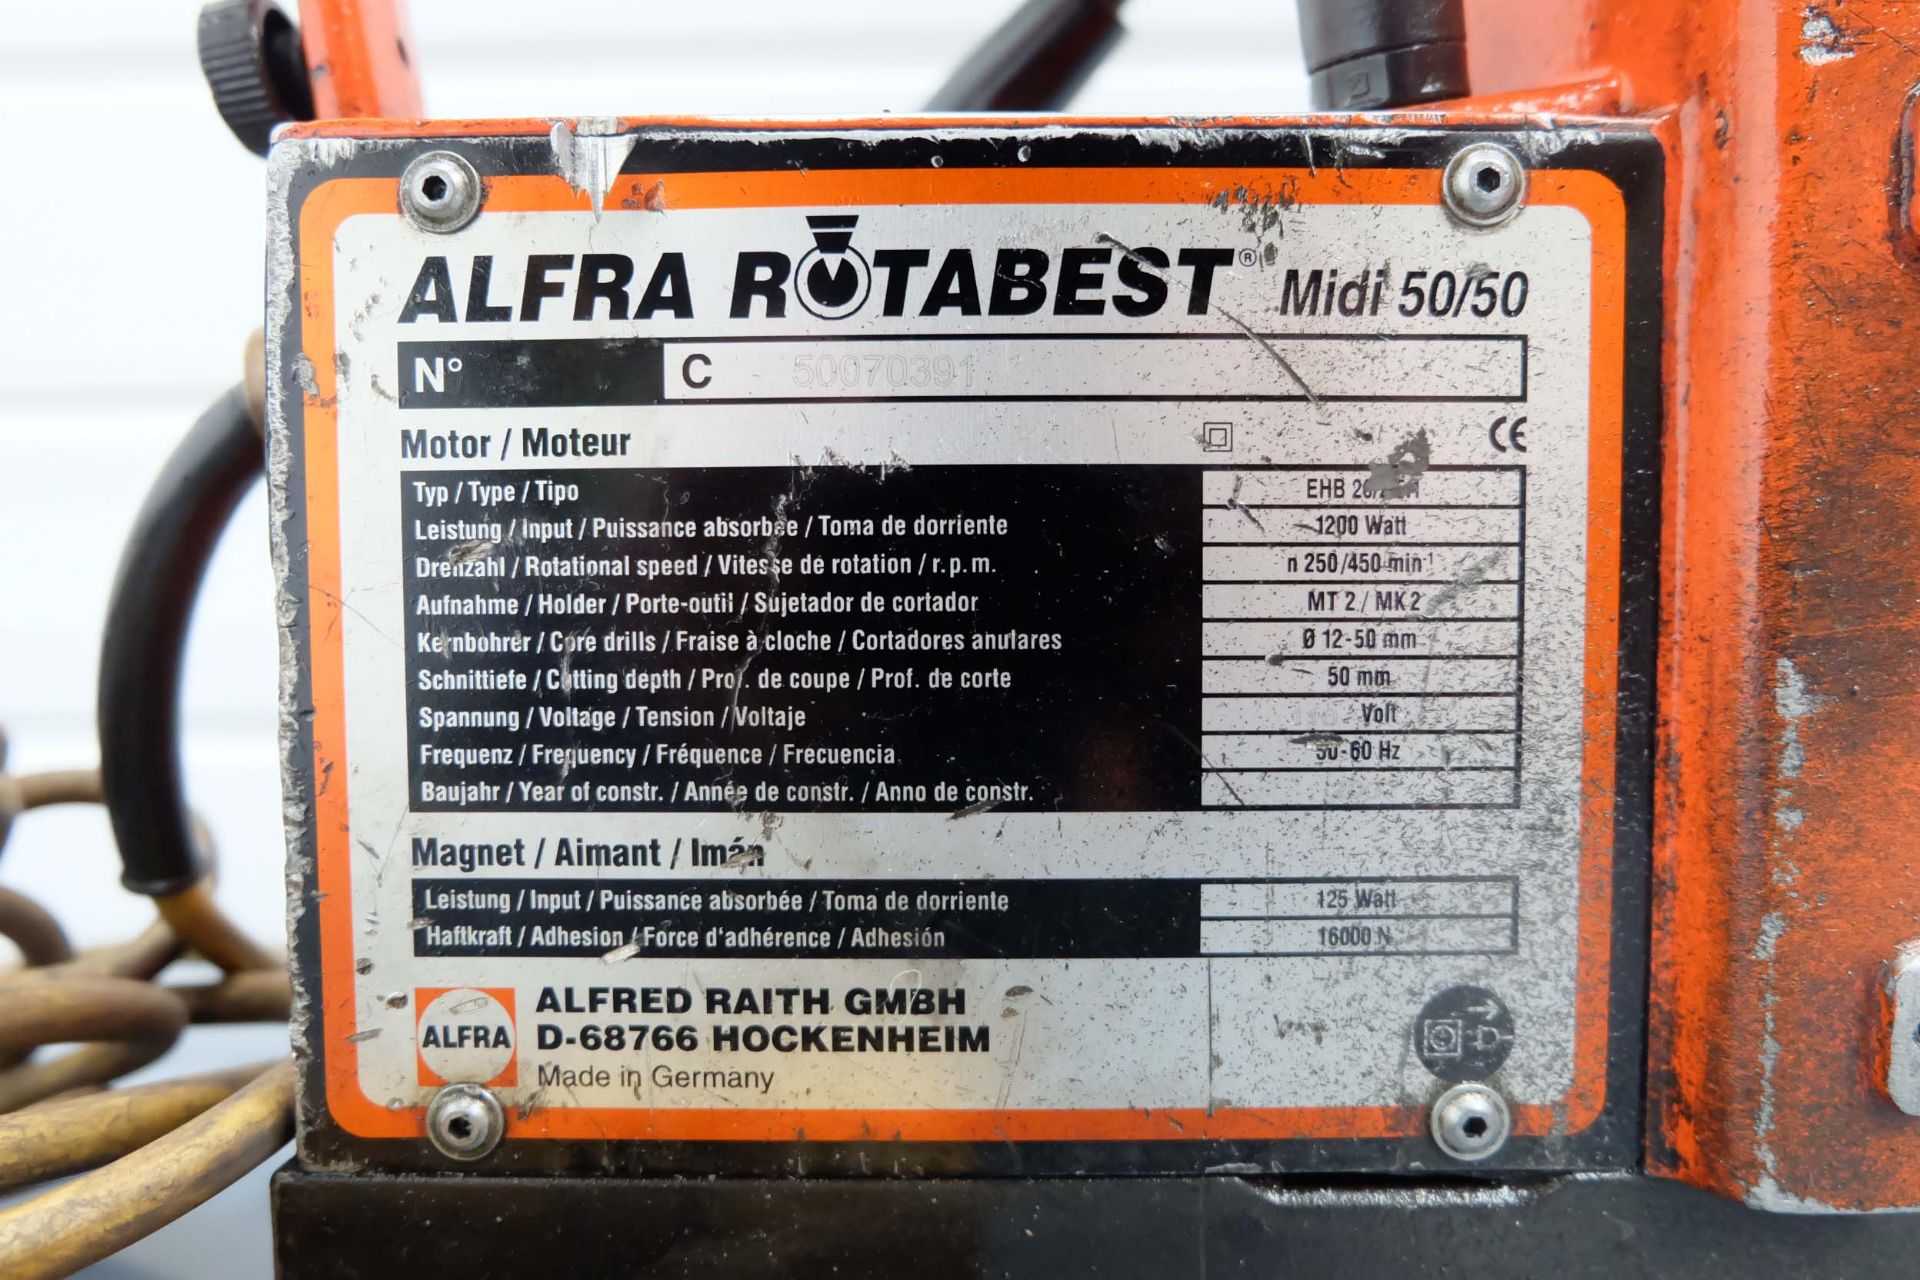 Alfra Rotabest Midi 50/50 110 Volt Electro Magnetic Drill. Spinde MT2/MK2 Capacity 12 - 50mm Dia. Dr - Image 5 of 8